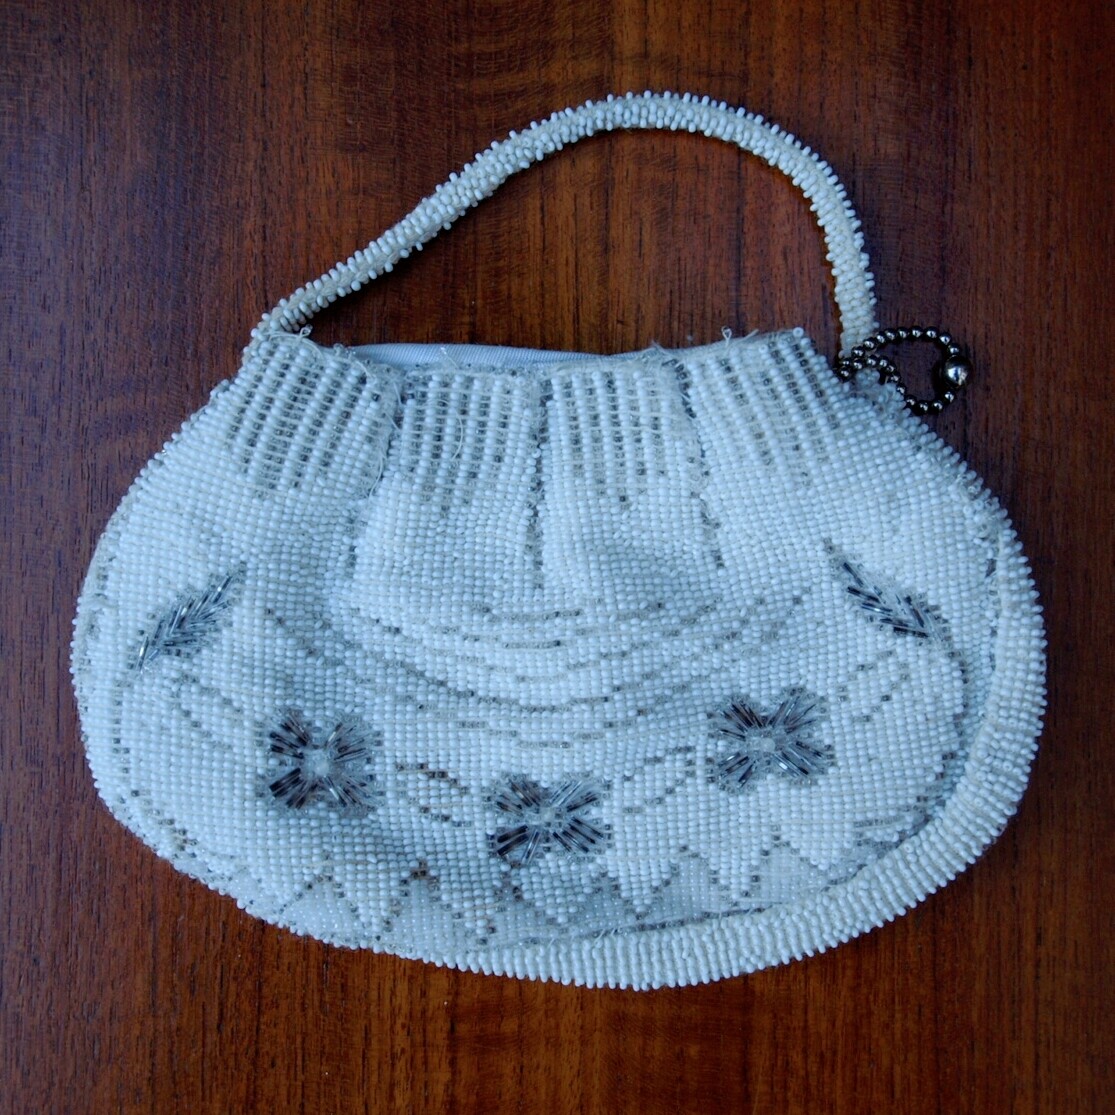 Small Antique 1920s White Beaded Evening Bag